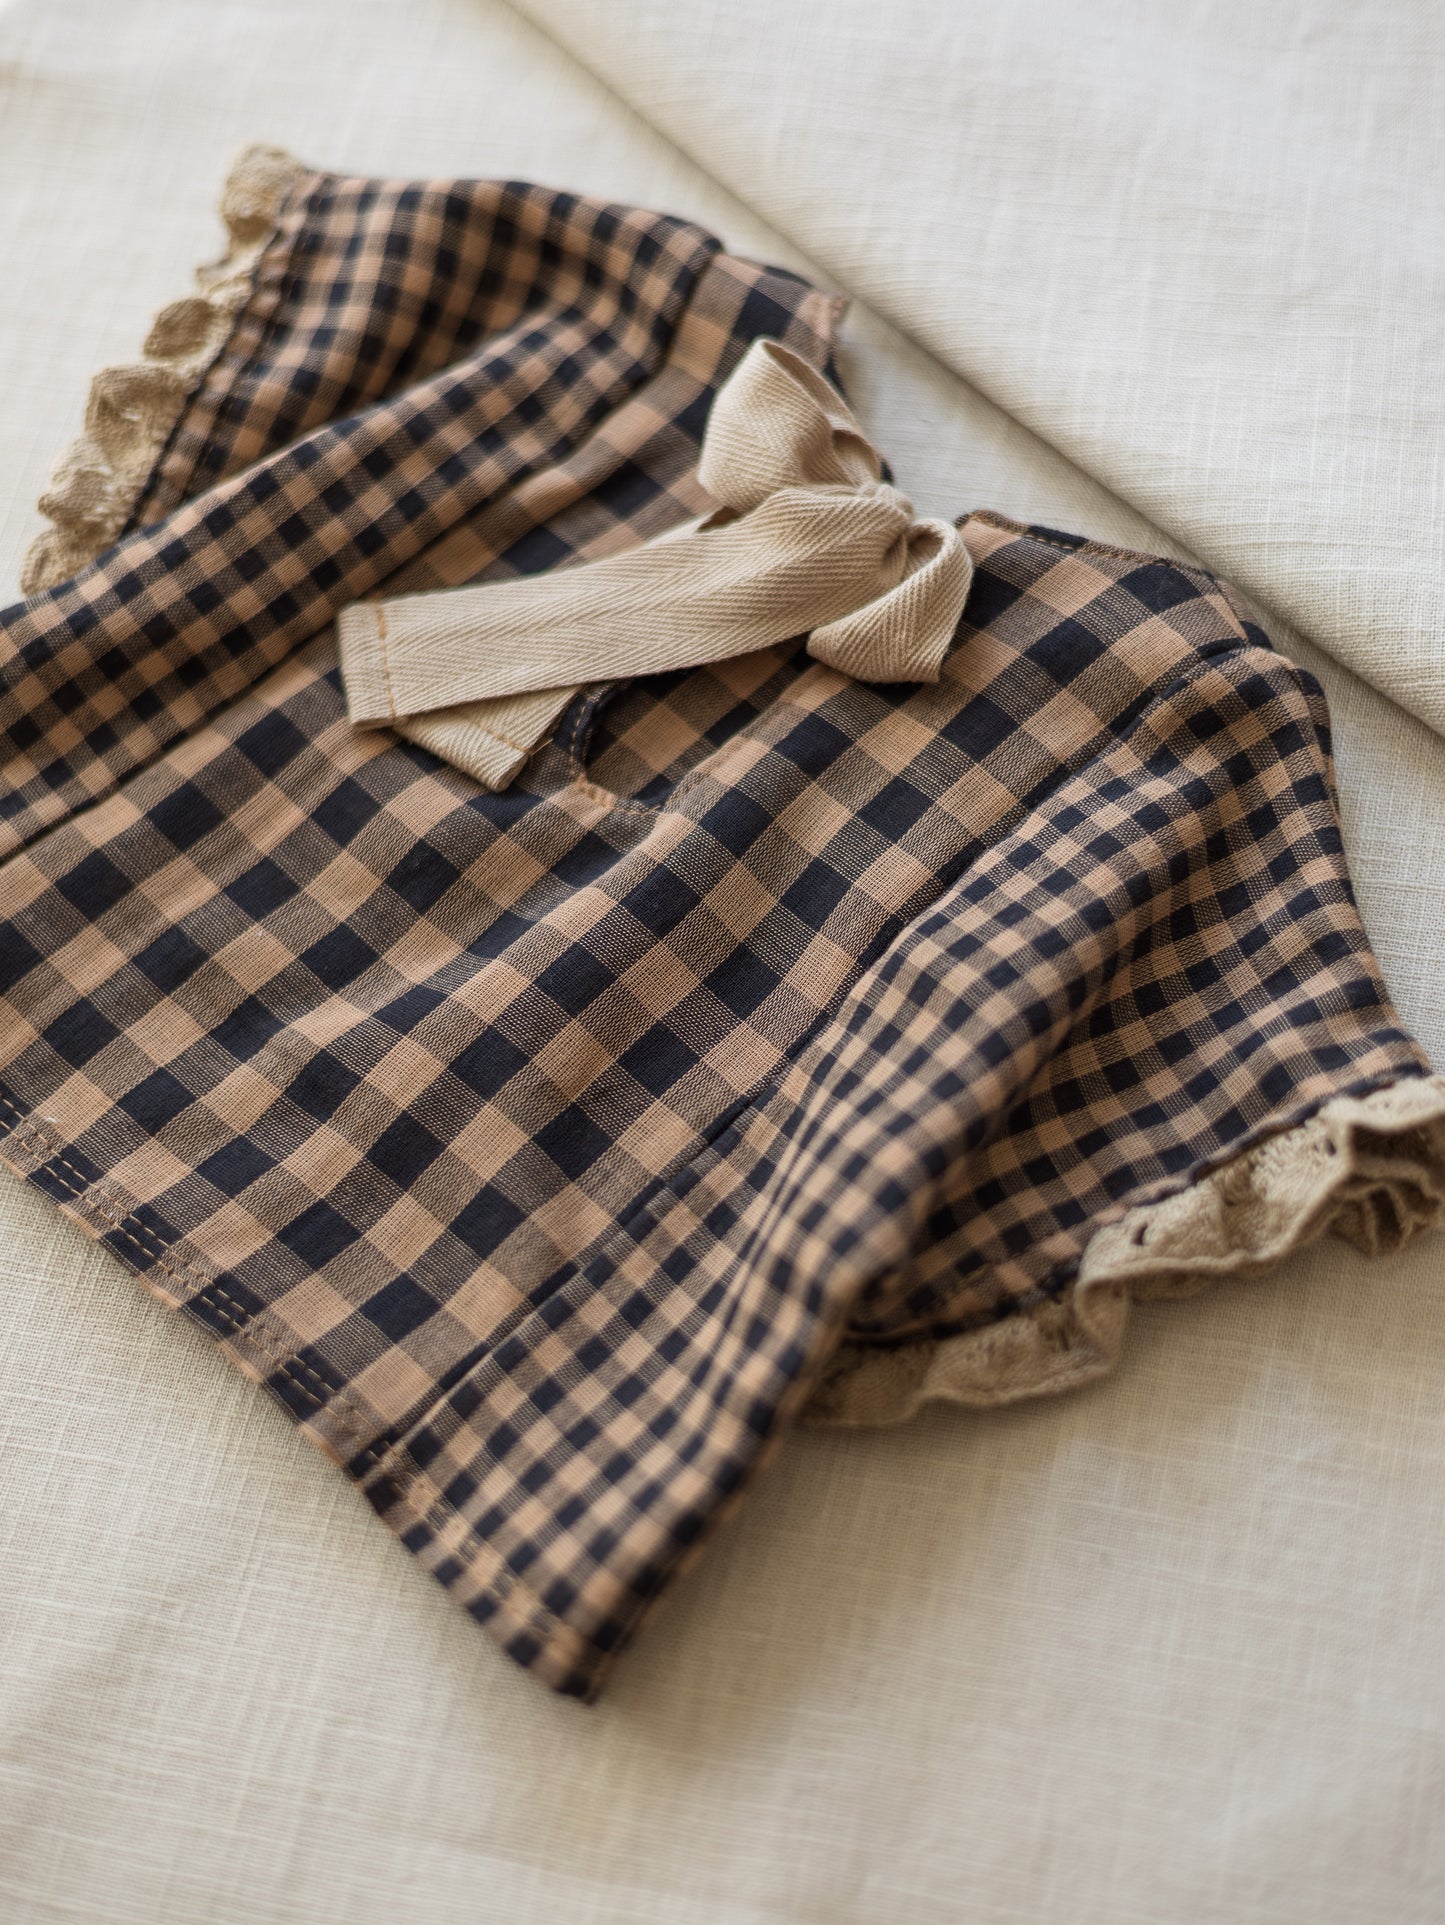 Muslin top / checkers - cacao